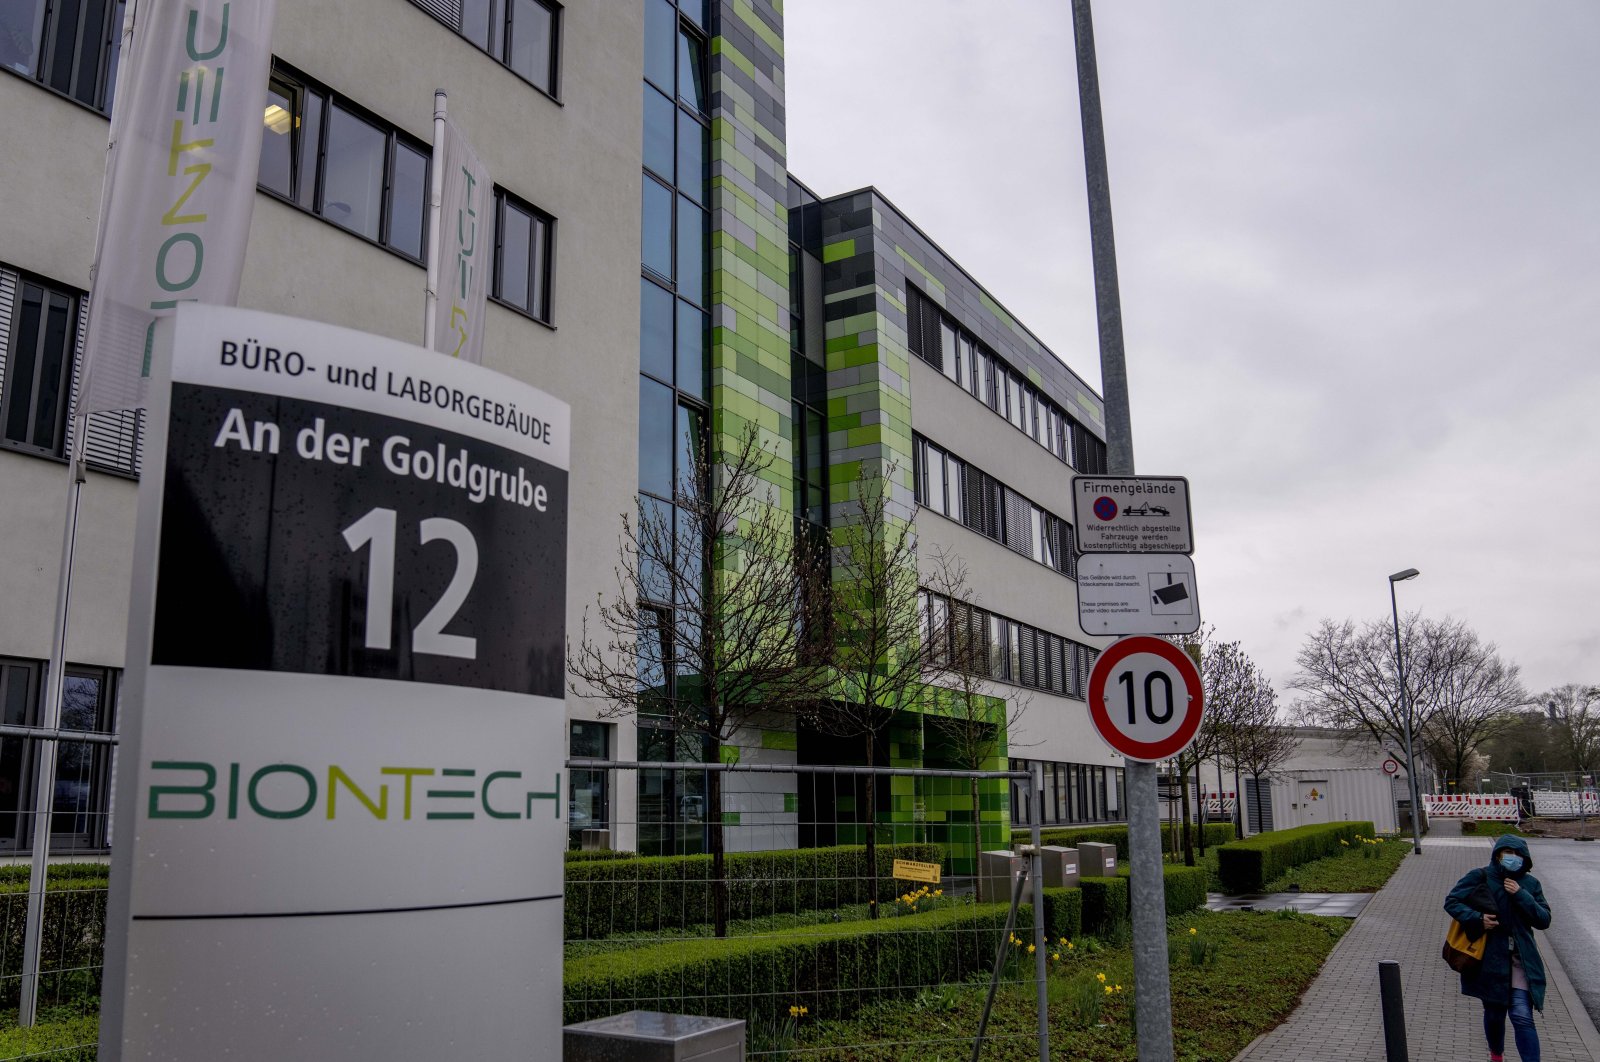 The headquarters of the German biotechnology company BioNTech is pictured in Mainz, Germany, March 30, 2022. (AP Photo)